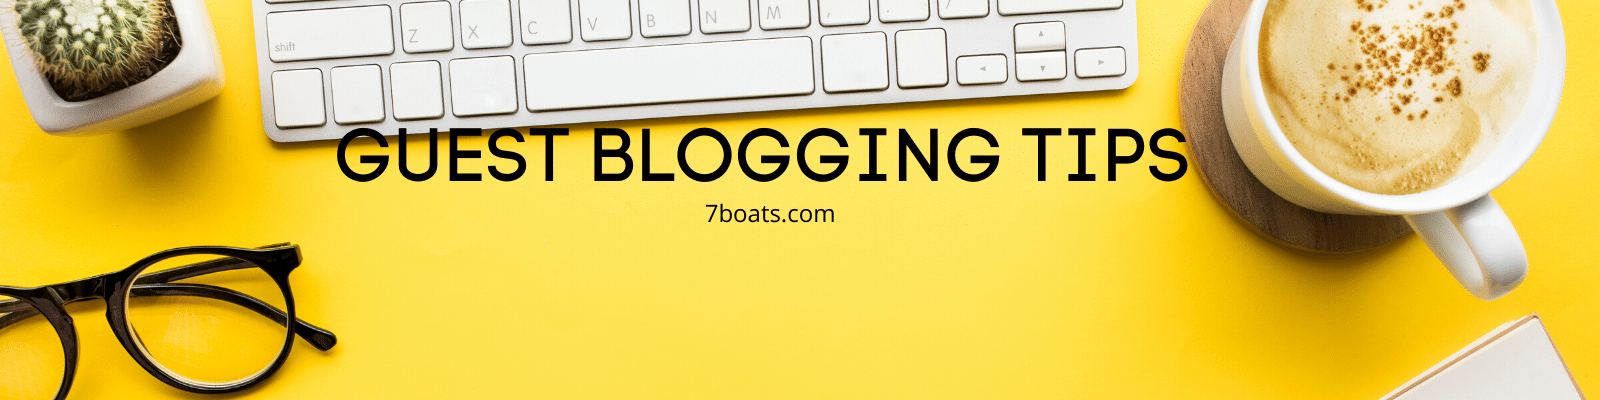 The Right Way to do Guest Blogging – The definitive Guide To Guest Blogging